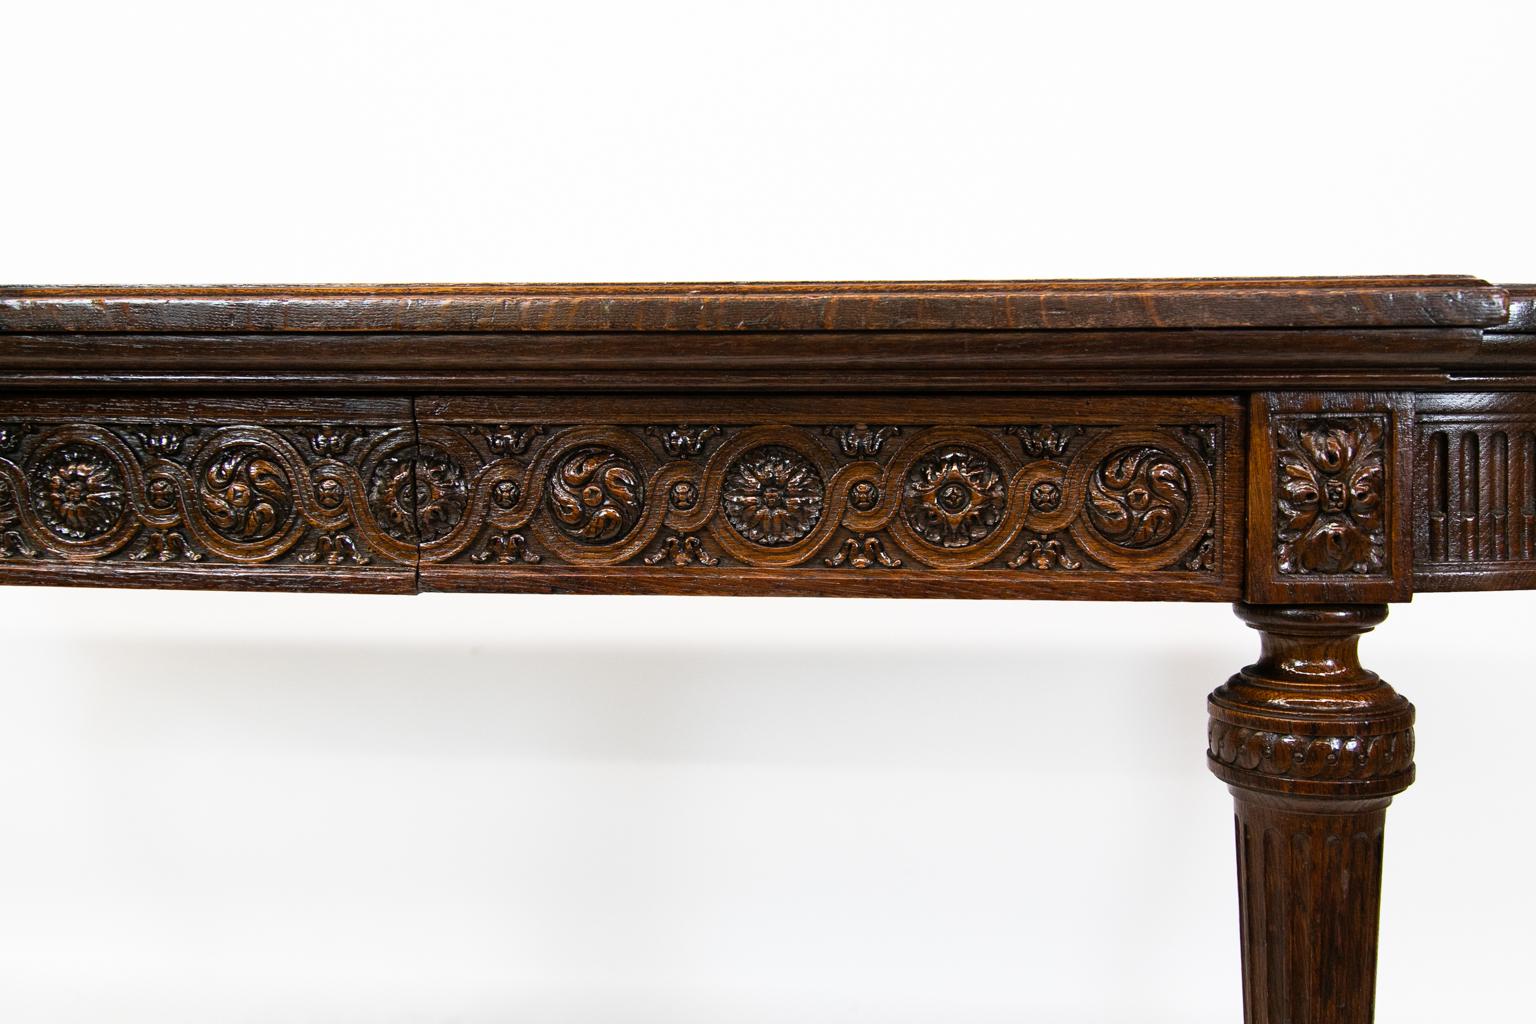 Carved English oak console table has a molded edge with ovolo shaped corners. The arched sides are carved with stop fluting and have carved panels to the rear. The apron of the front disguises two full drawers which are carved with interlaced